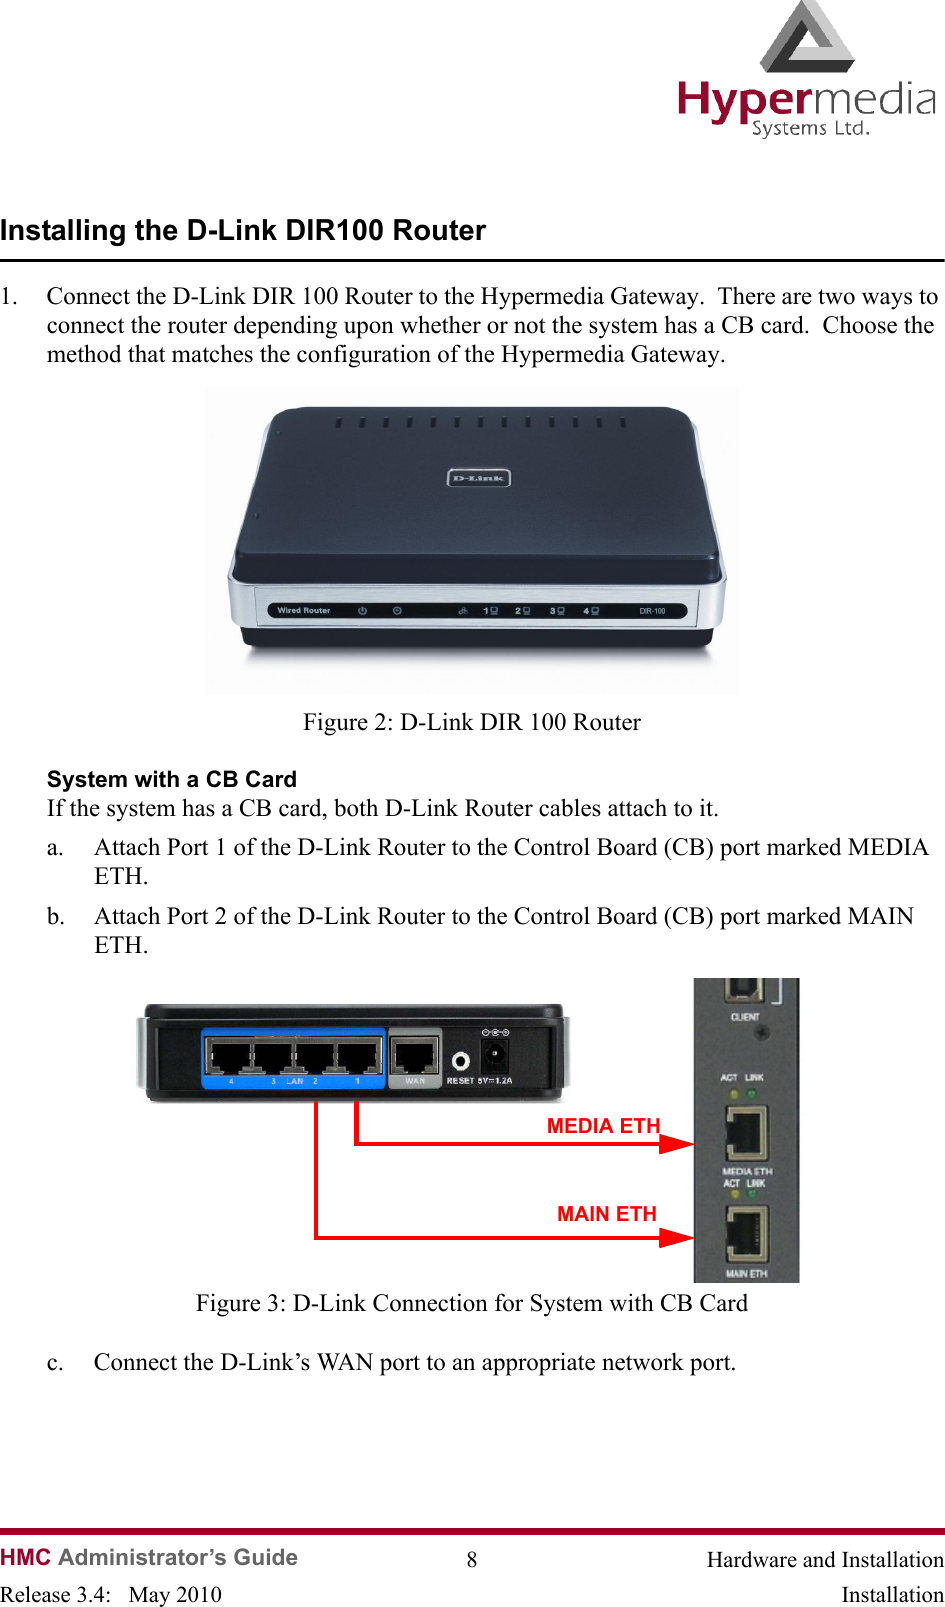   HMC Administrator’s Guide 8 Hardware and InstallationRelease 3.4:   May 2010 InstallationInstalling the D-Link DIR100 Router1. Connect the D-Link DIR 100 Router to the Hypermedia Gateway.  There are two ways to connect the router depending upon whether or not the system has a CB card.  Choose the method that matches the configuration of the Hypermedia Gateway.              Figure 2: D-Link DIR 100 RouterSystem with a CB CardIf the system has a CB card, both D-Link Router cables attach to it.a. Attach Port 1 of the D-Link Router to the Control Board (CB) port marked MEDIA ETH.  b. Attach Port 2 of the D-Link Router to the Control Board (CB) port marked MAIN ETH.                Figure 3: D-Link Connection for System with CB Cardc. Connect the D-Link’s WAN port to an appropriate network port.MEDIA ETHMAIN ETH